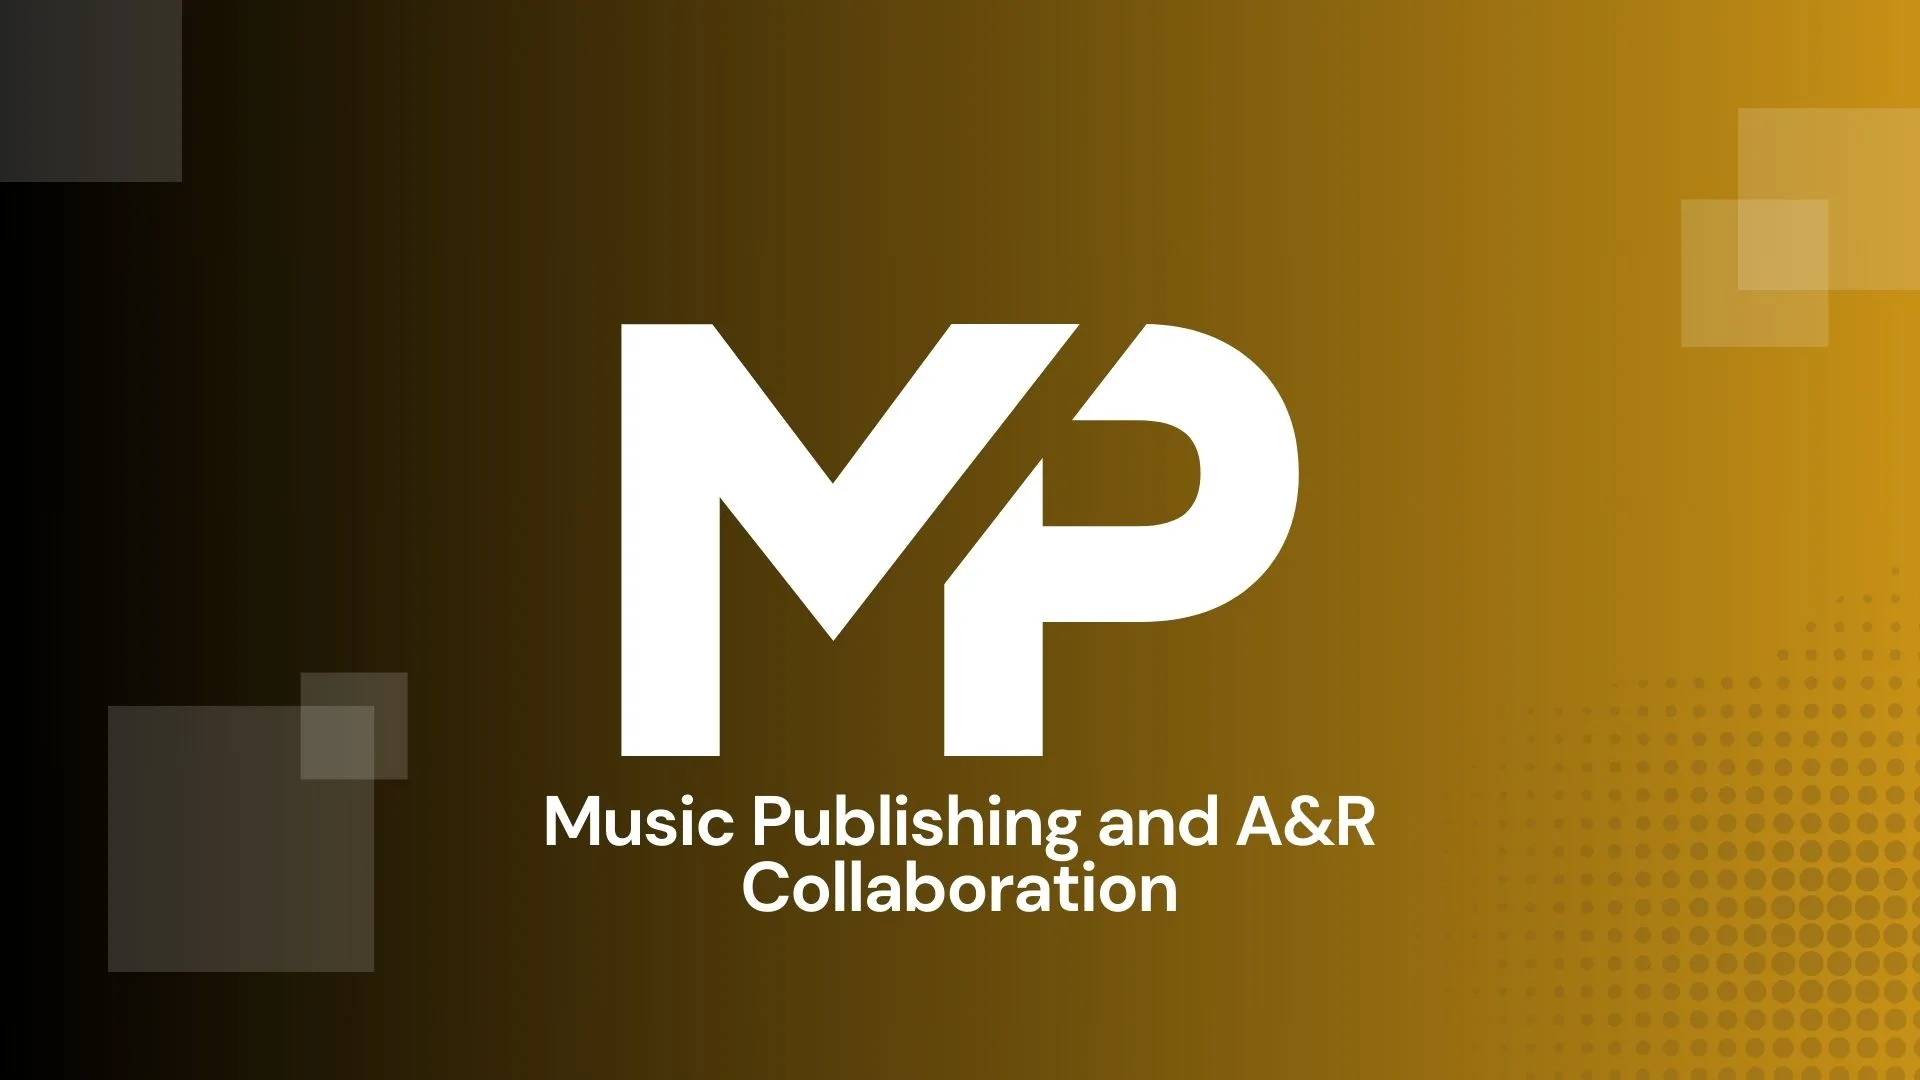 Music Publishing and A&R Collaboration